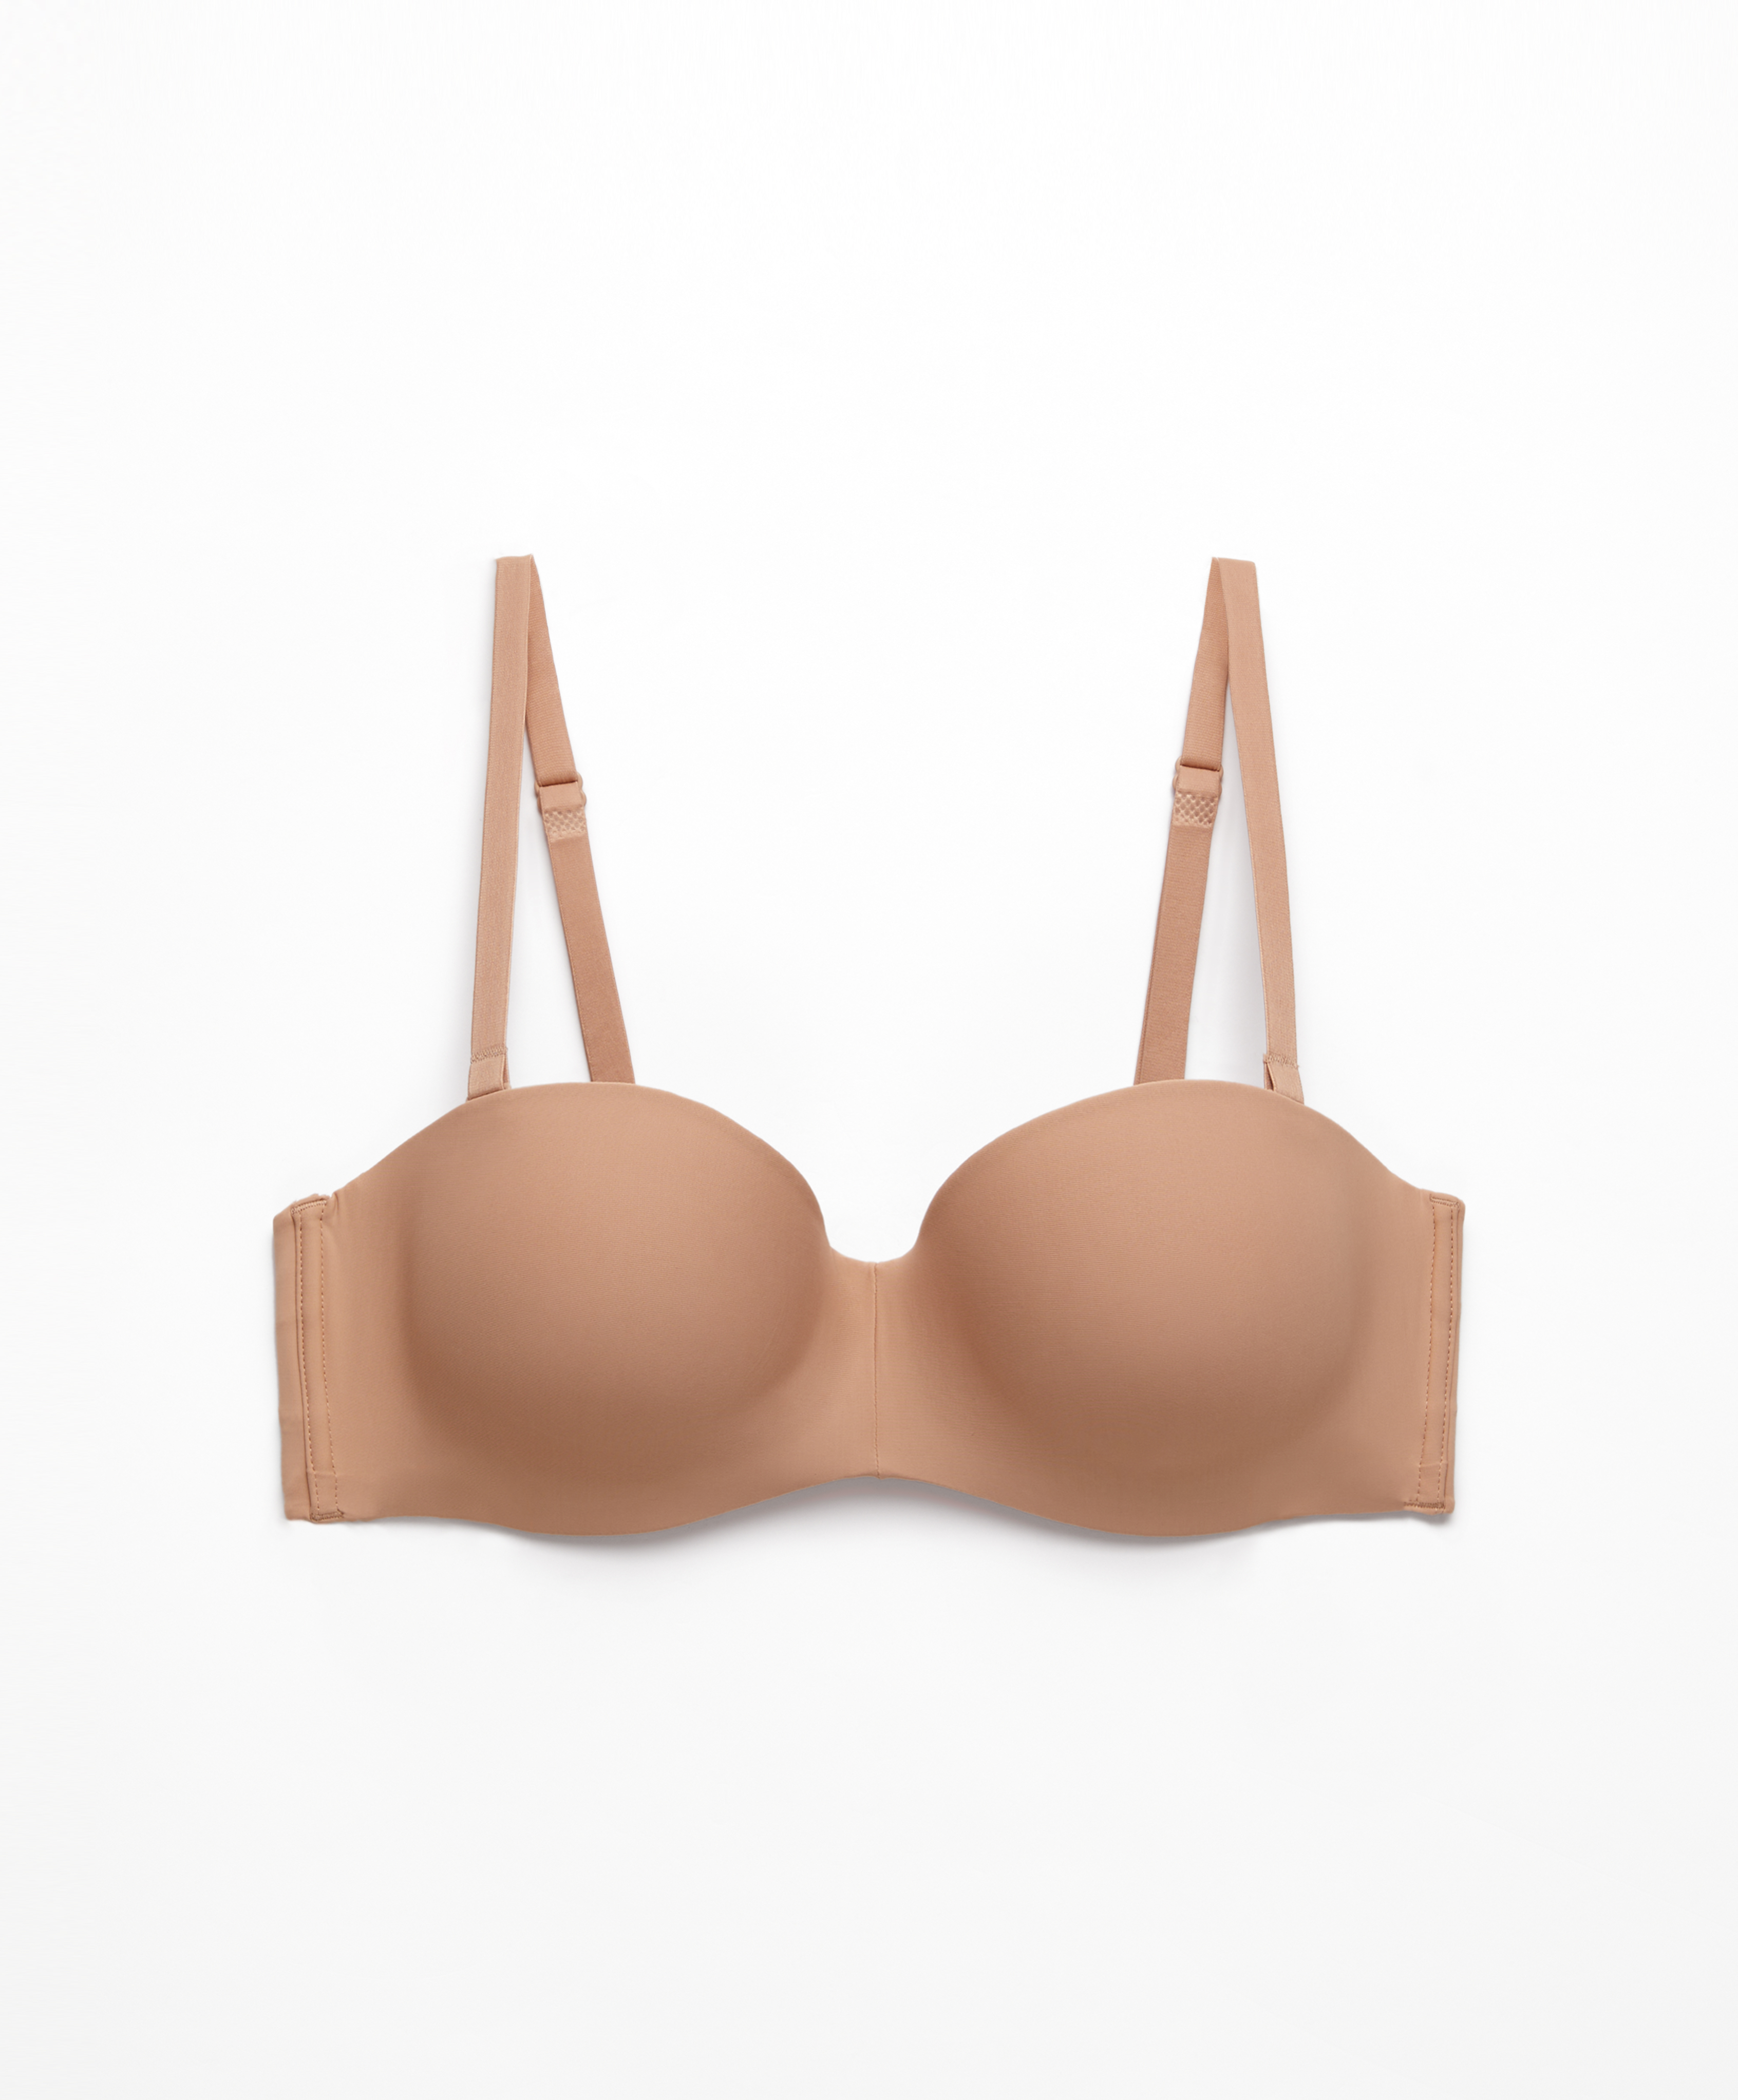 Polyamide blend push-up bra with removable straps